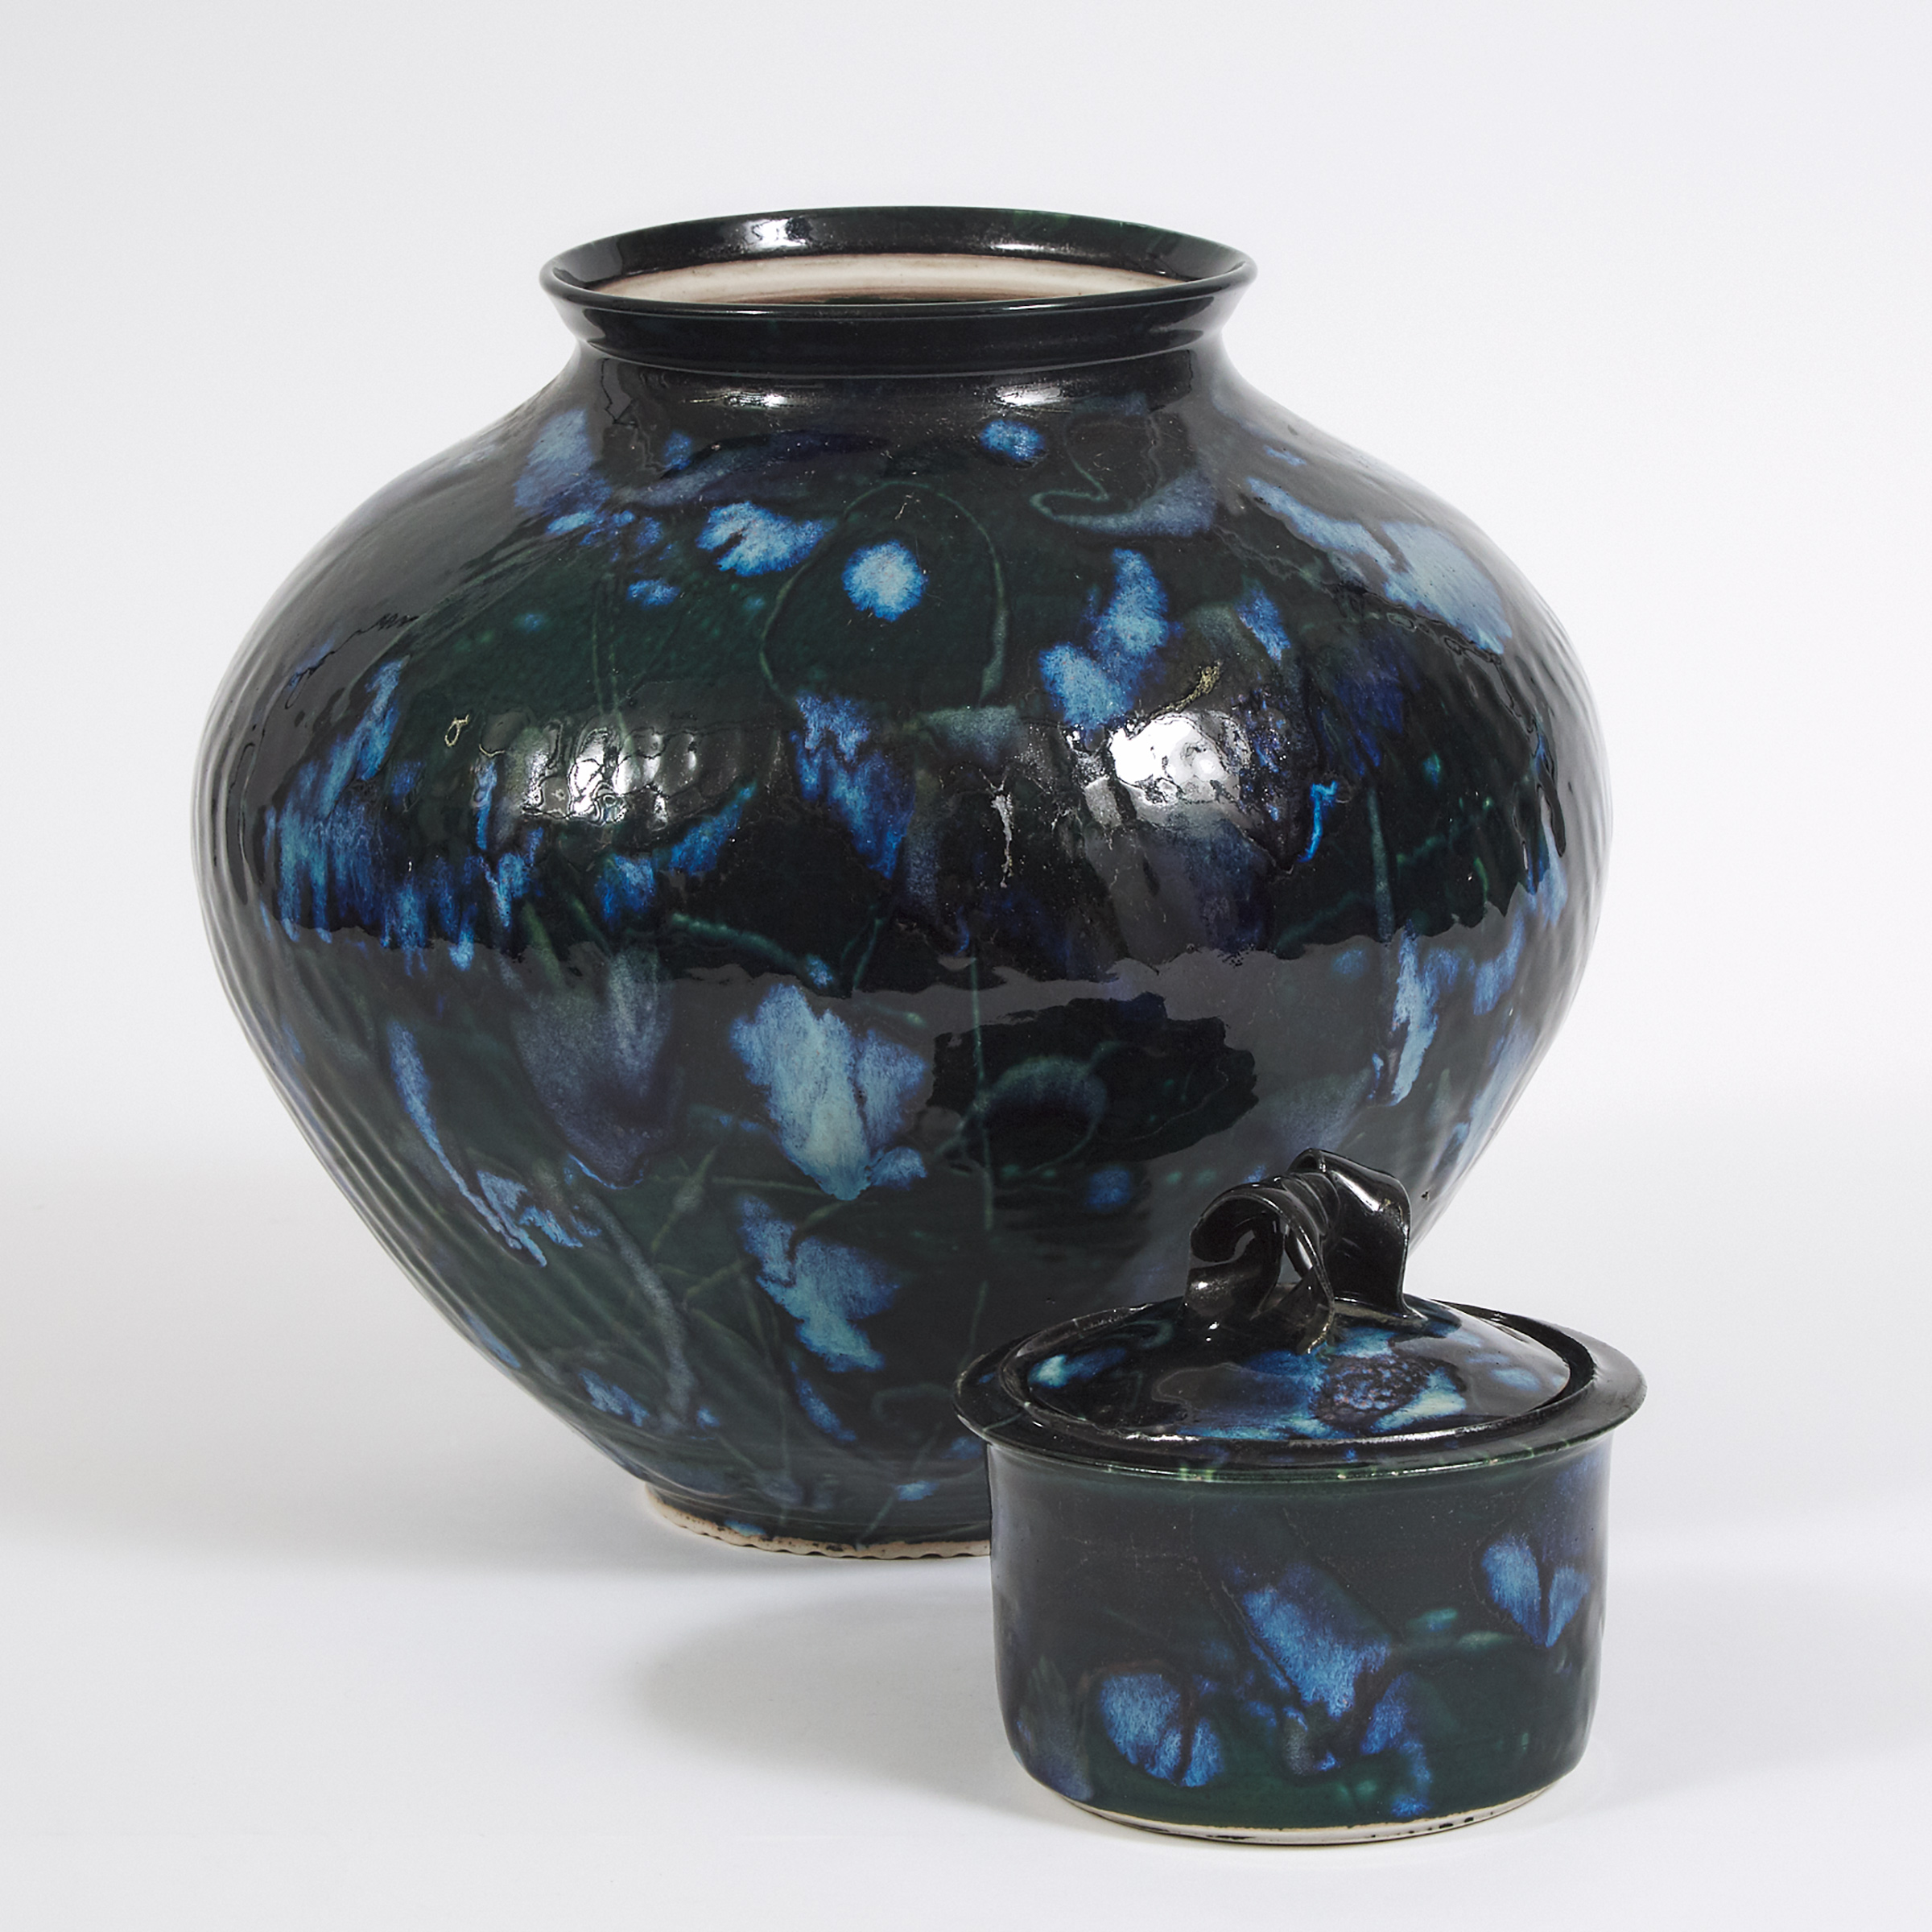 Kayo O'Young (Canadian, b.1950), Blue and Green Glazed Double Covered Vase, 1993